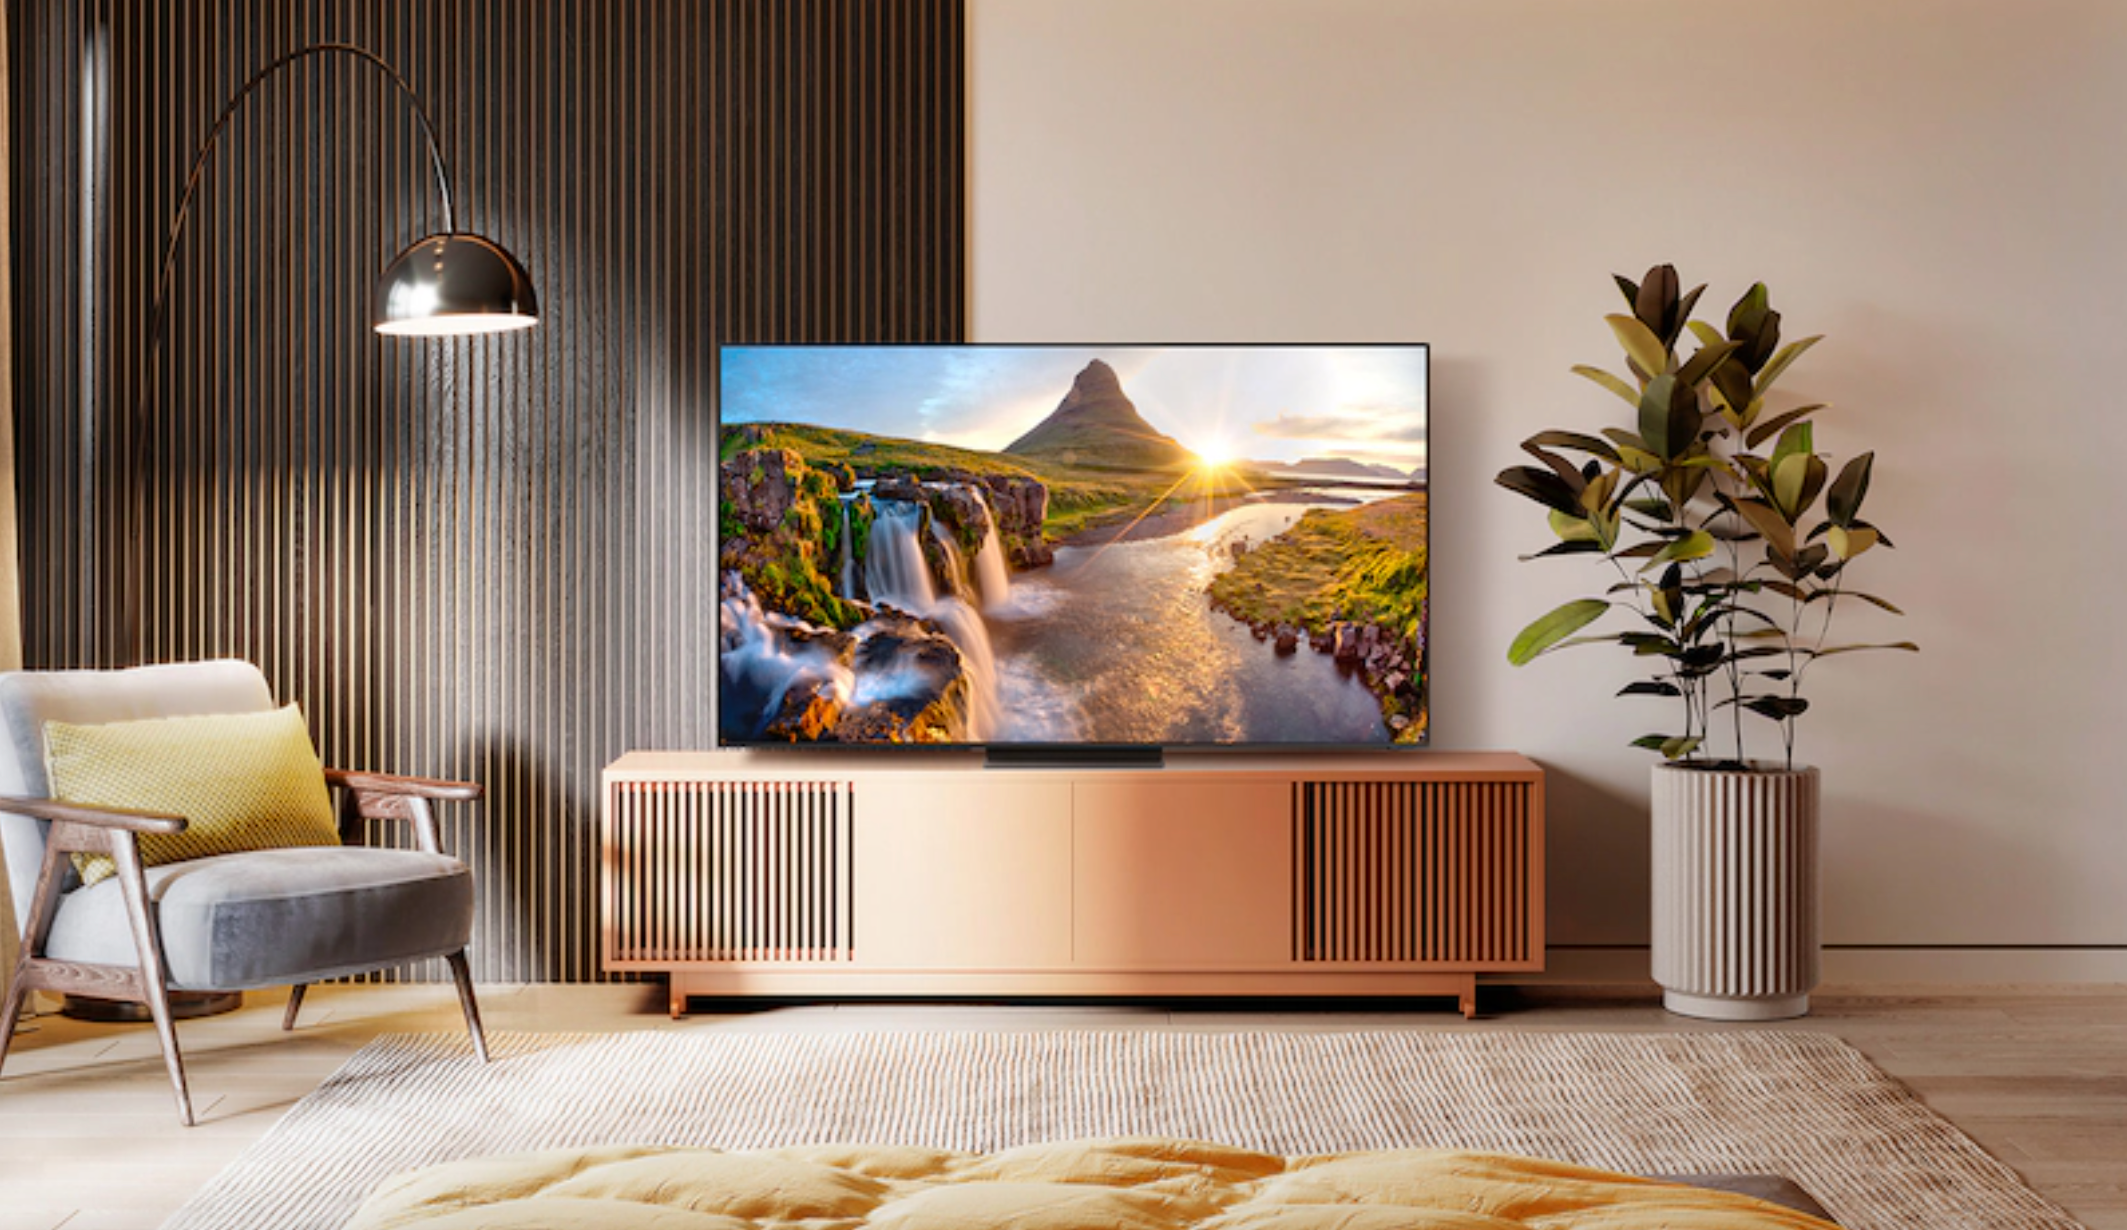 Samsung Creates a TV That Blends Into Your Wall  Architectural Digest